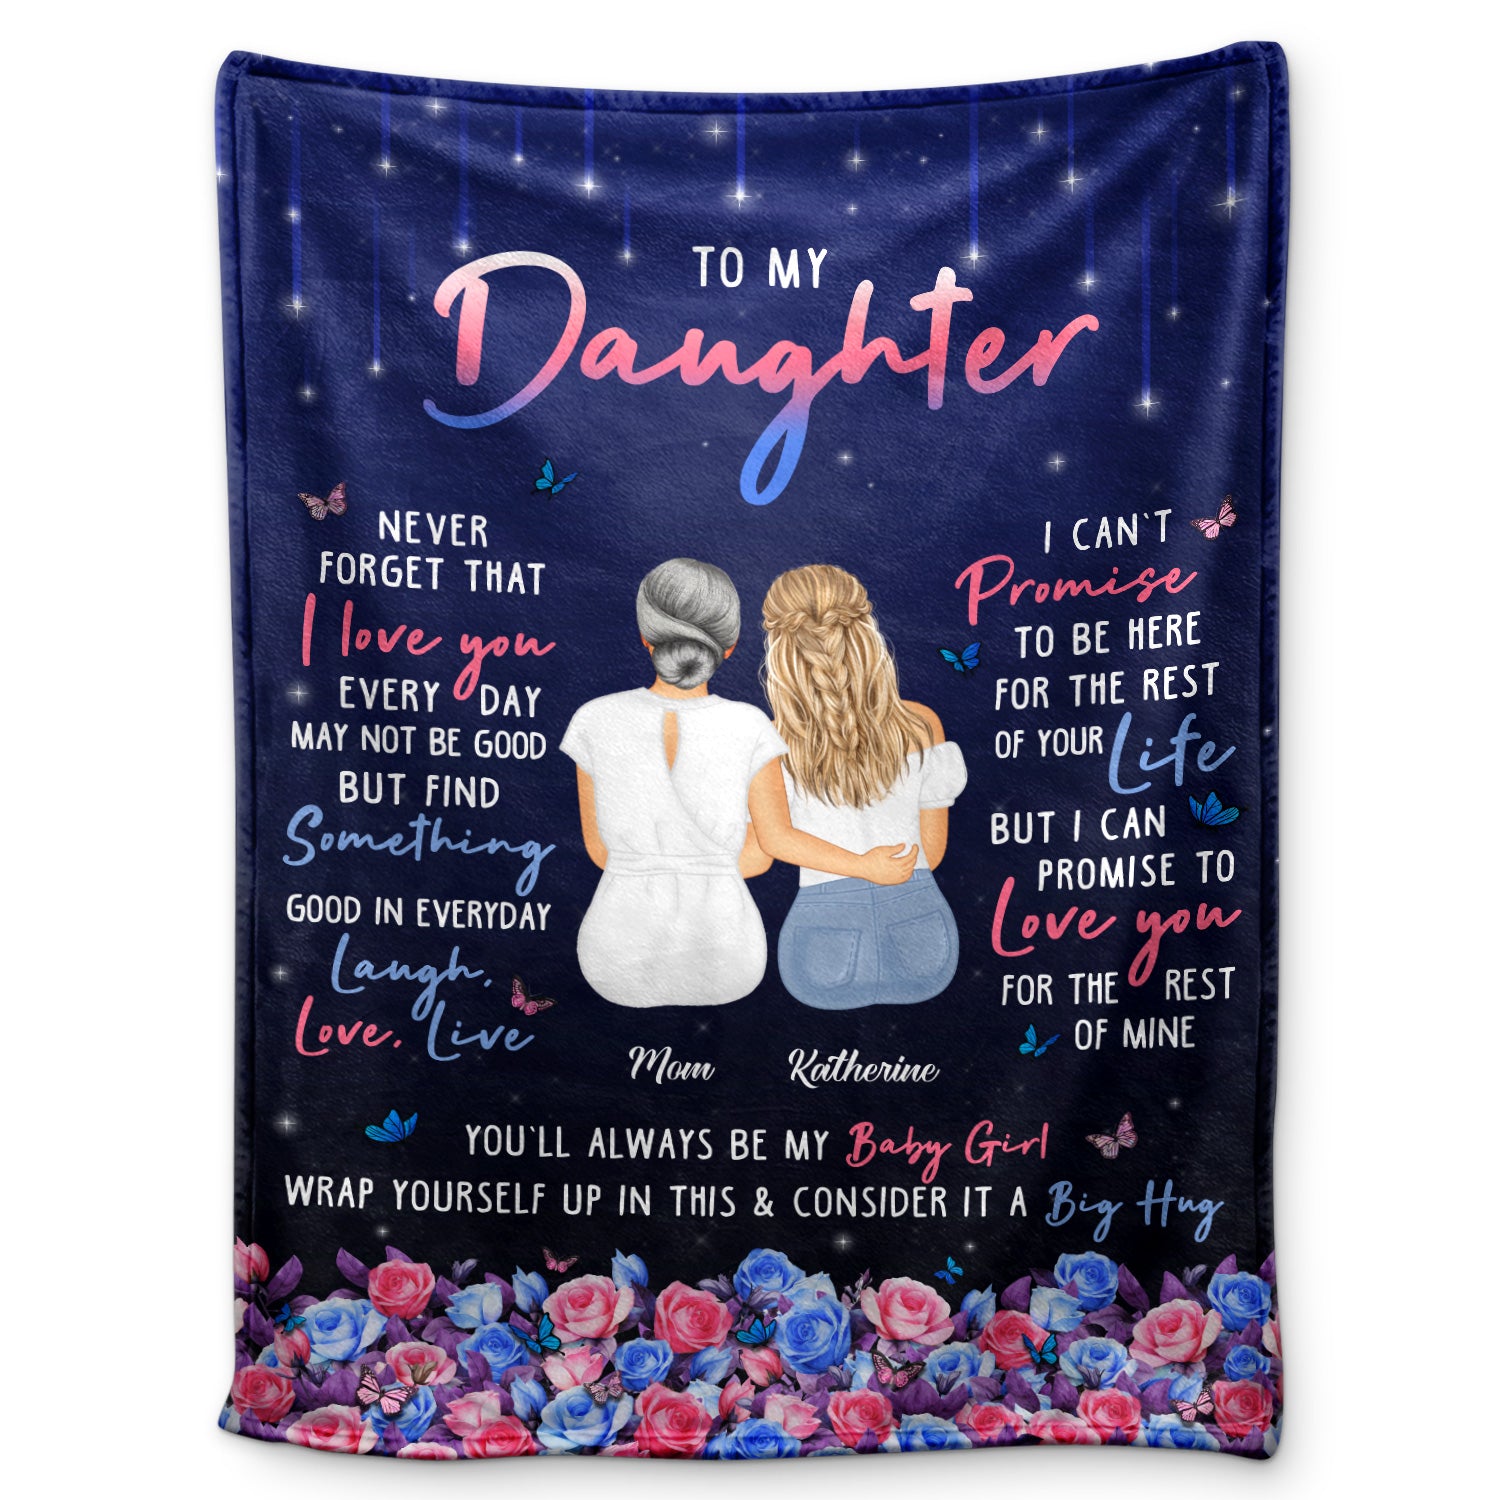 Never Forget That I Love You - Gift For Daughter From Mother - Personalized Fleece Blanket, Sherpa Blanket